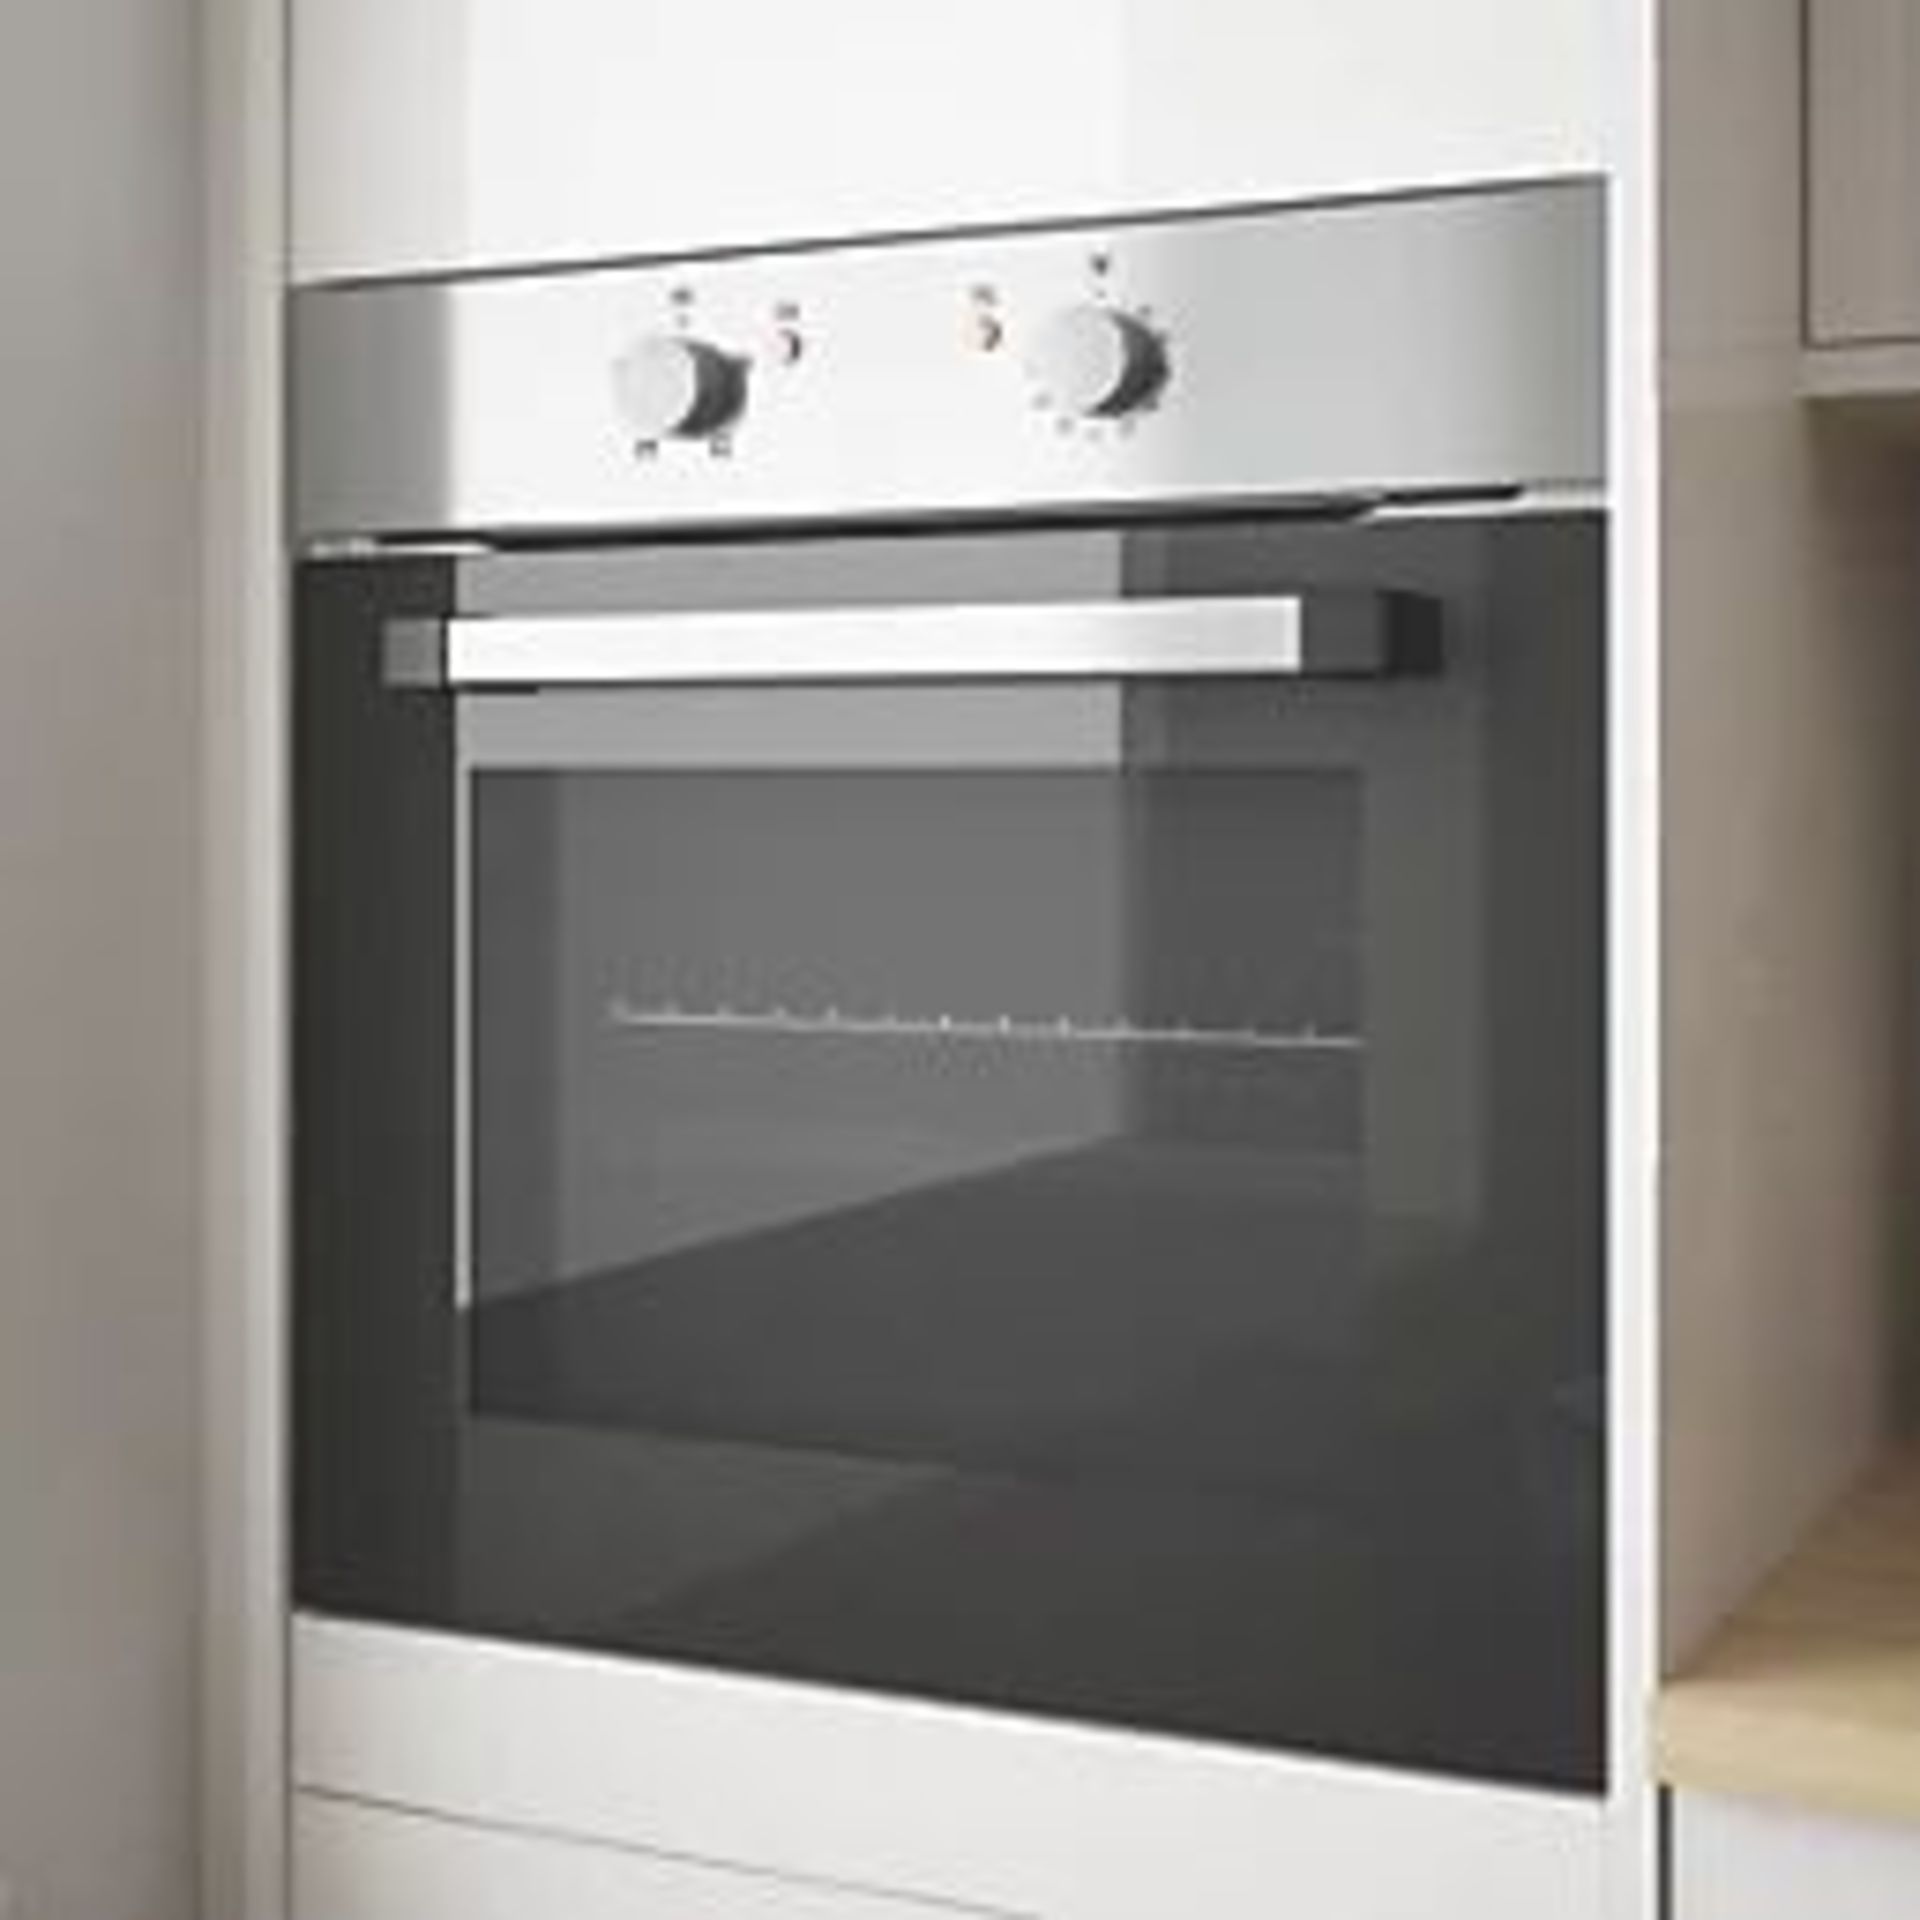 COOKE & LEWIS BUILT- IN SINGLE ELECTRIC OVEN STAINLESS STEEL 595MM X 595MM . - Er45.